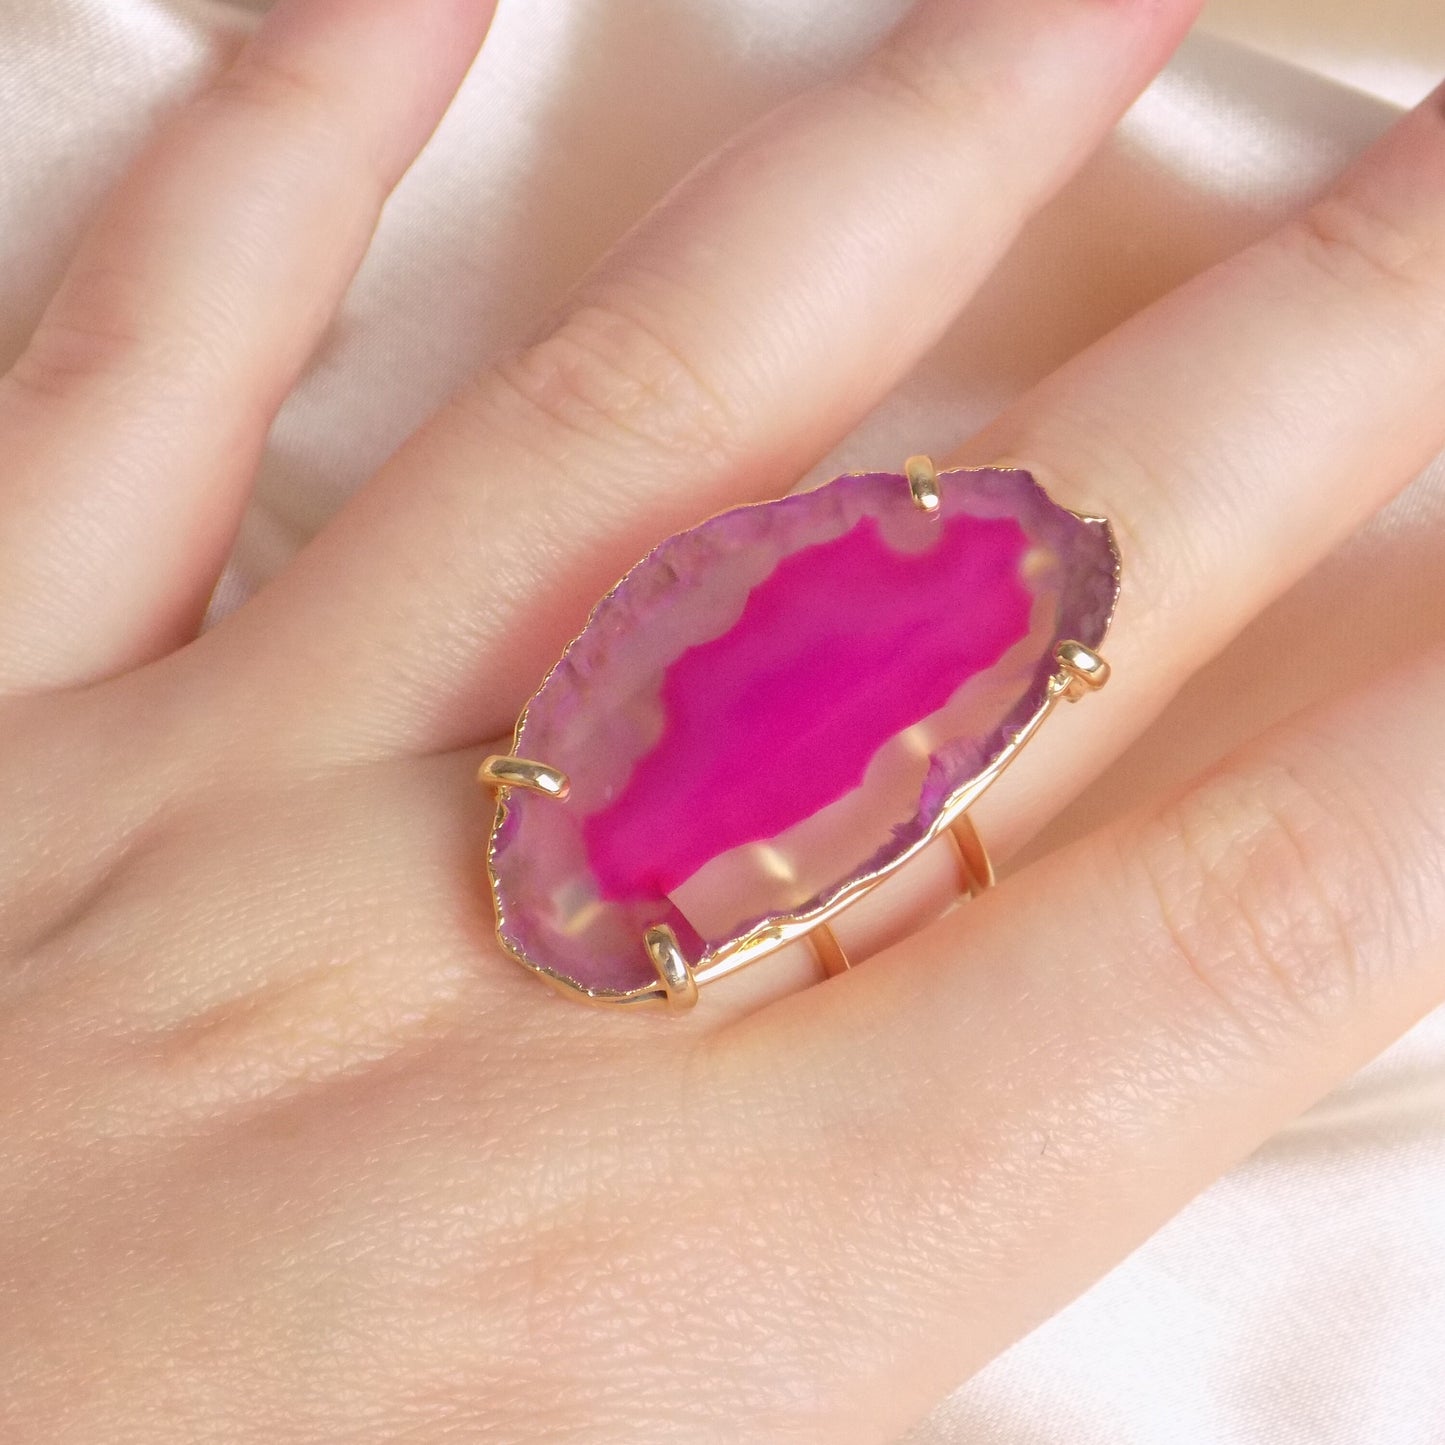 Boho Pink Agate Ring Gold Plated Adjustable - Elegant Statement Jewelry